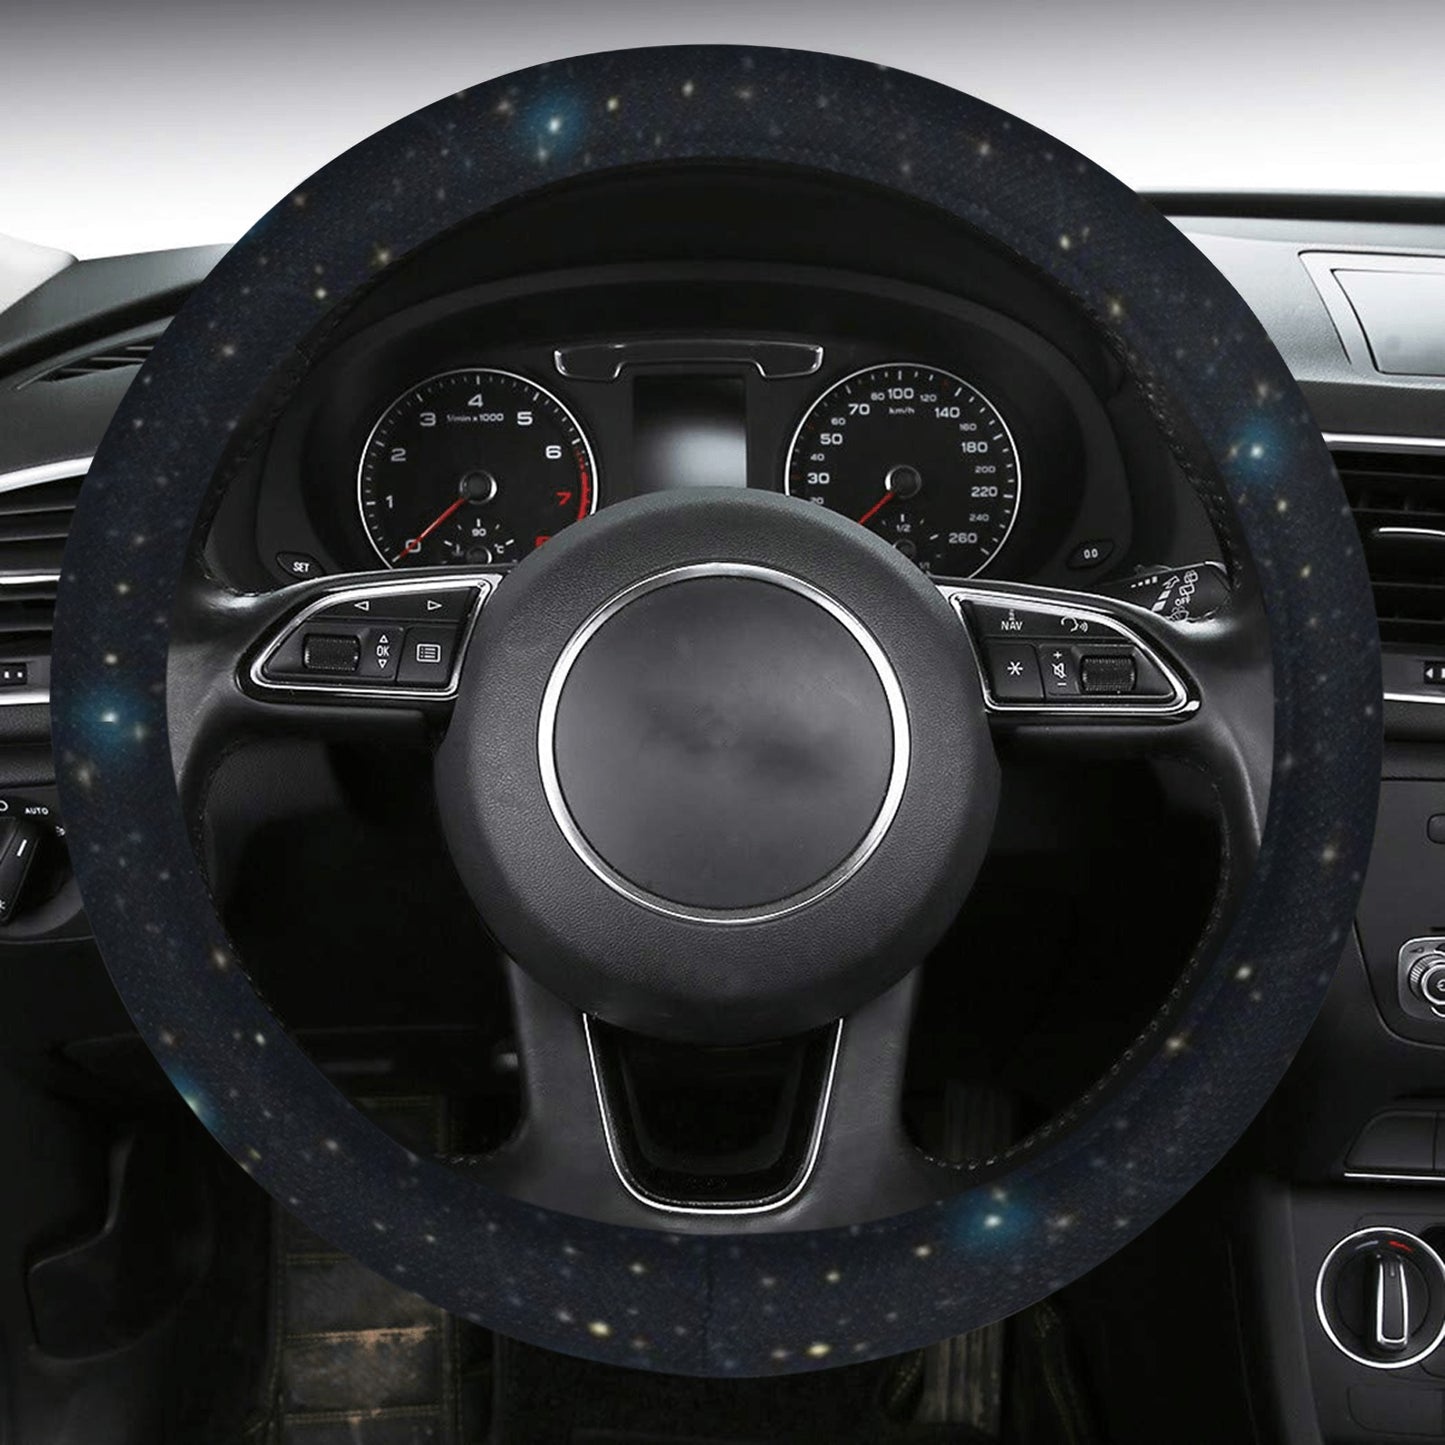 Constellation Steering Wheel Cover with Anti-Slip Insert, Space Stars Galaxy Night Sky Print Car Driving Auto Wrap Protector Women Men